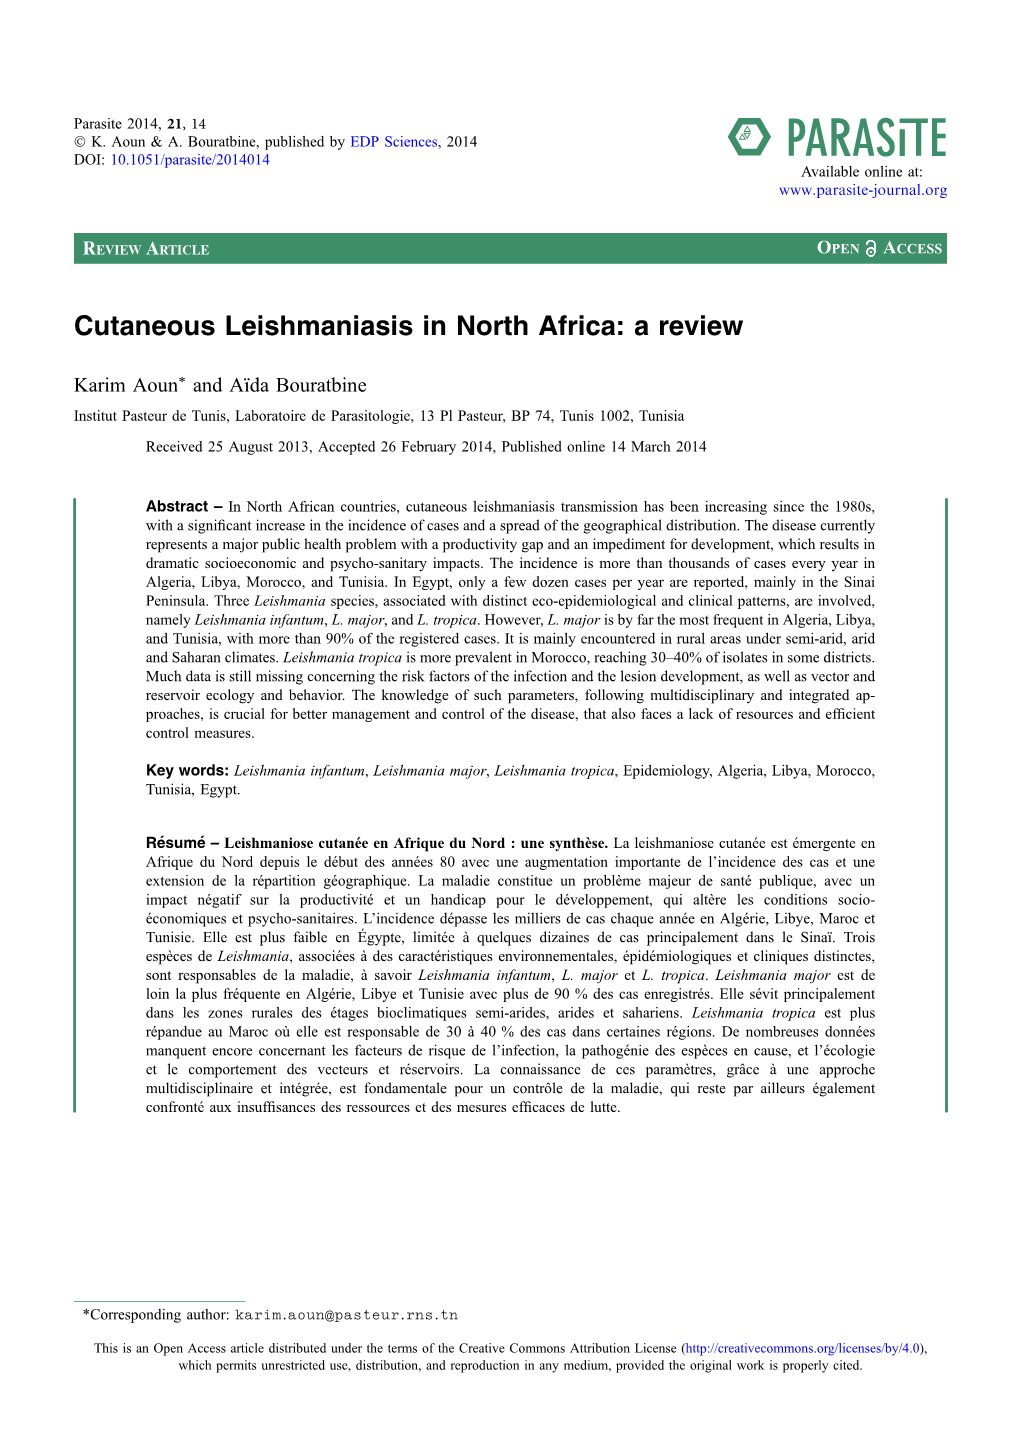 Cutaneous Leishmaniasis in North Africa: a Review